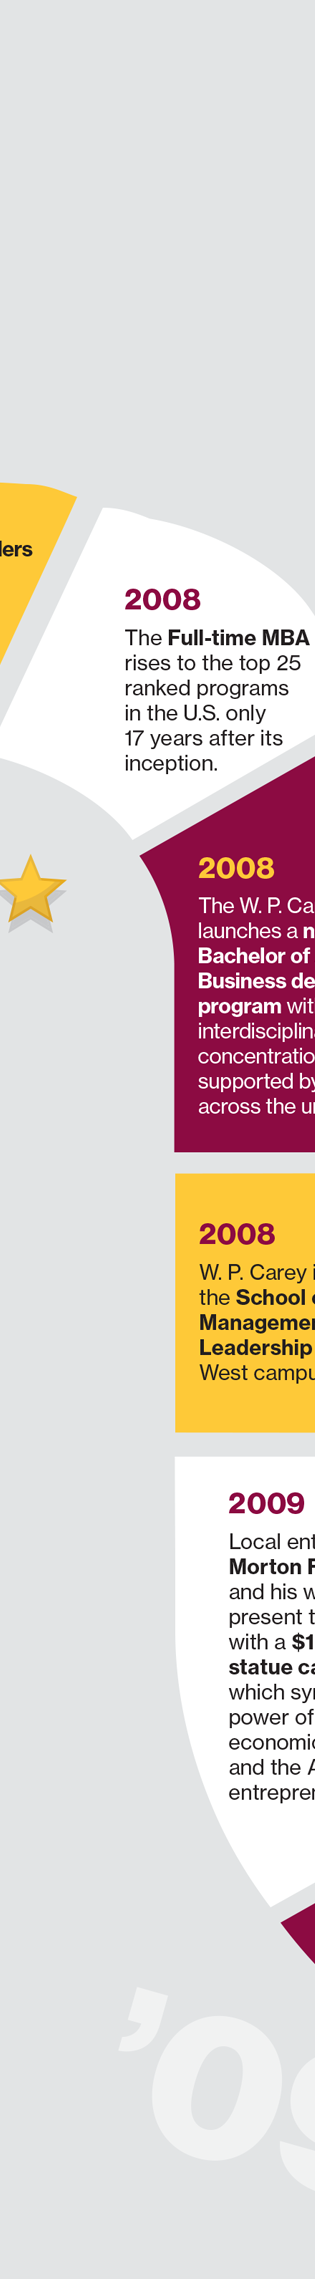 In 2008, the Full-time MBA program rapidly climbed to a top 25 ranking in the U.S. just 17 years after its inception. The same year, the W. P. Carey School introduced a new Bachelor of Arts in Business degree program with interdisciplinary concentration options, collaborating across university colleges. Also in 2008, the School of Global Management and Leadership from ASUs West campus became part of W. P. Carey. In 2009, local entrepreneur Morton Fleischer and his wife, Donna, presented the school with a $1.3 million statue named Spirit, symbolizing the strength of political and economic freedom and the American entrepreneurial spirit.